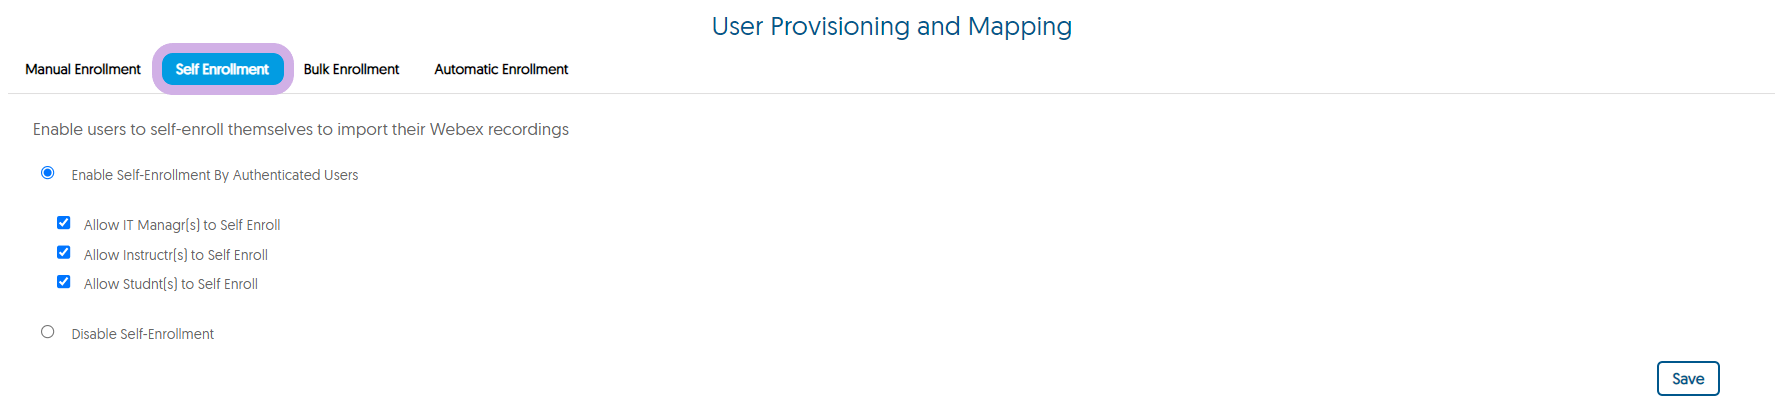 The User Provisioning and Mapping panel for Webex with Set Enrollment selected.